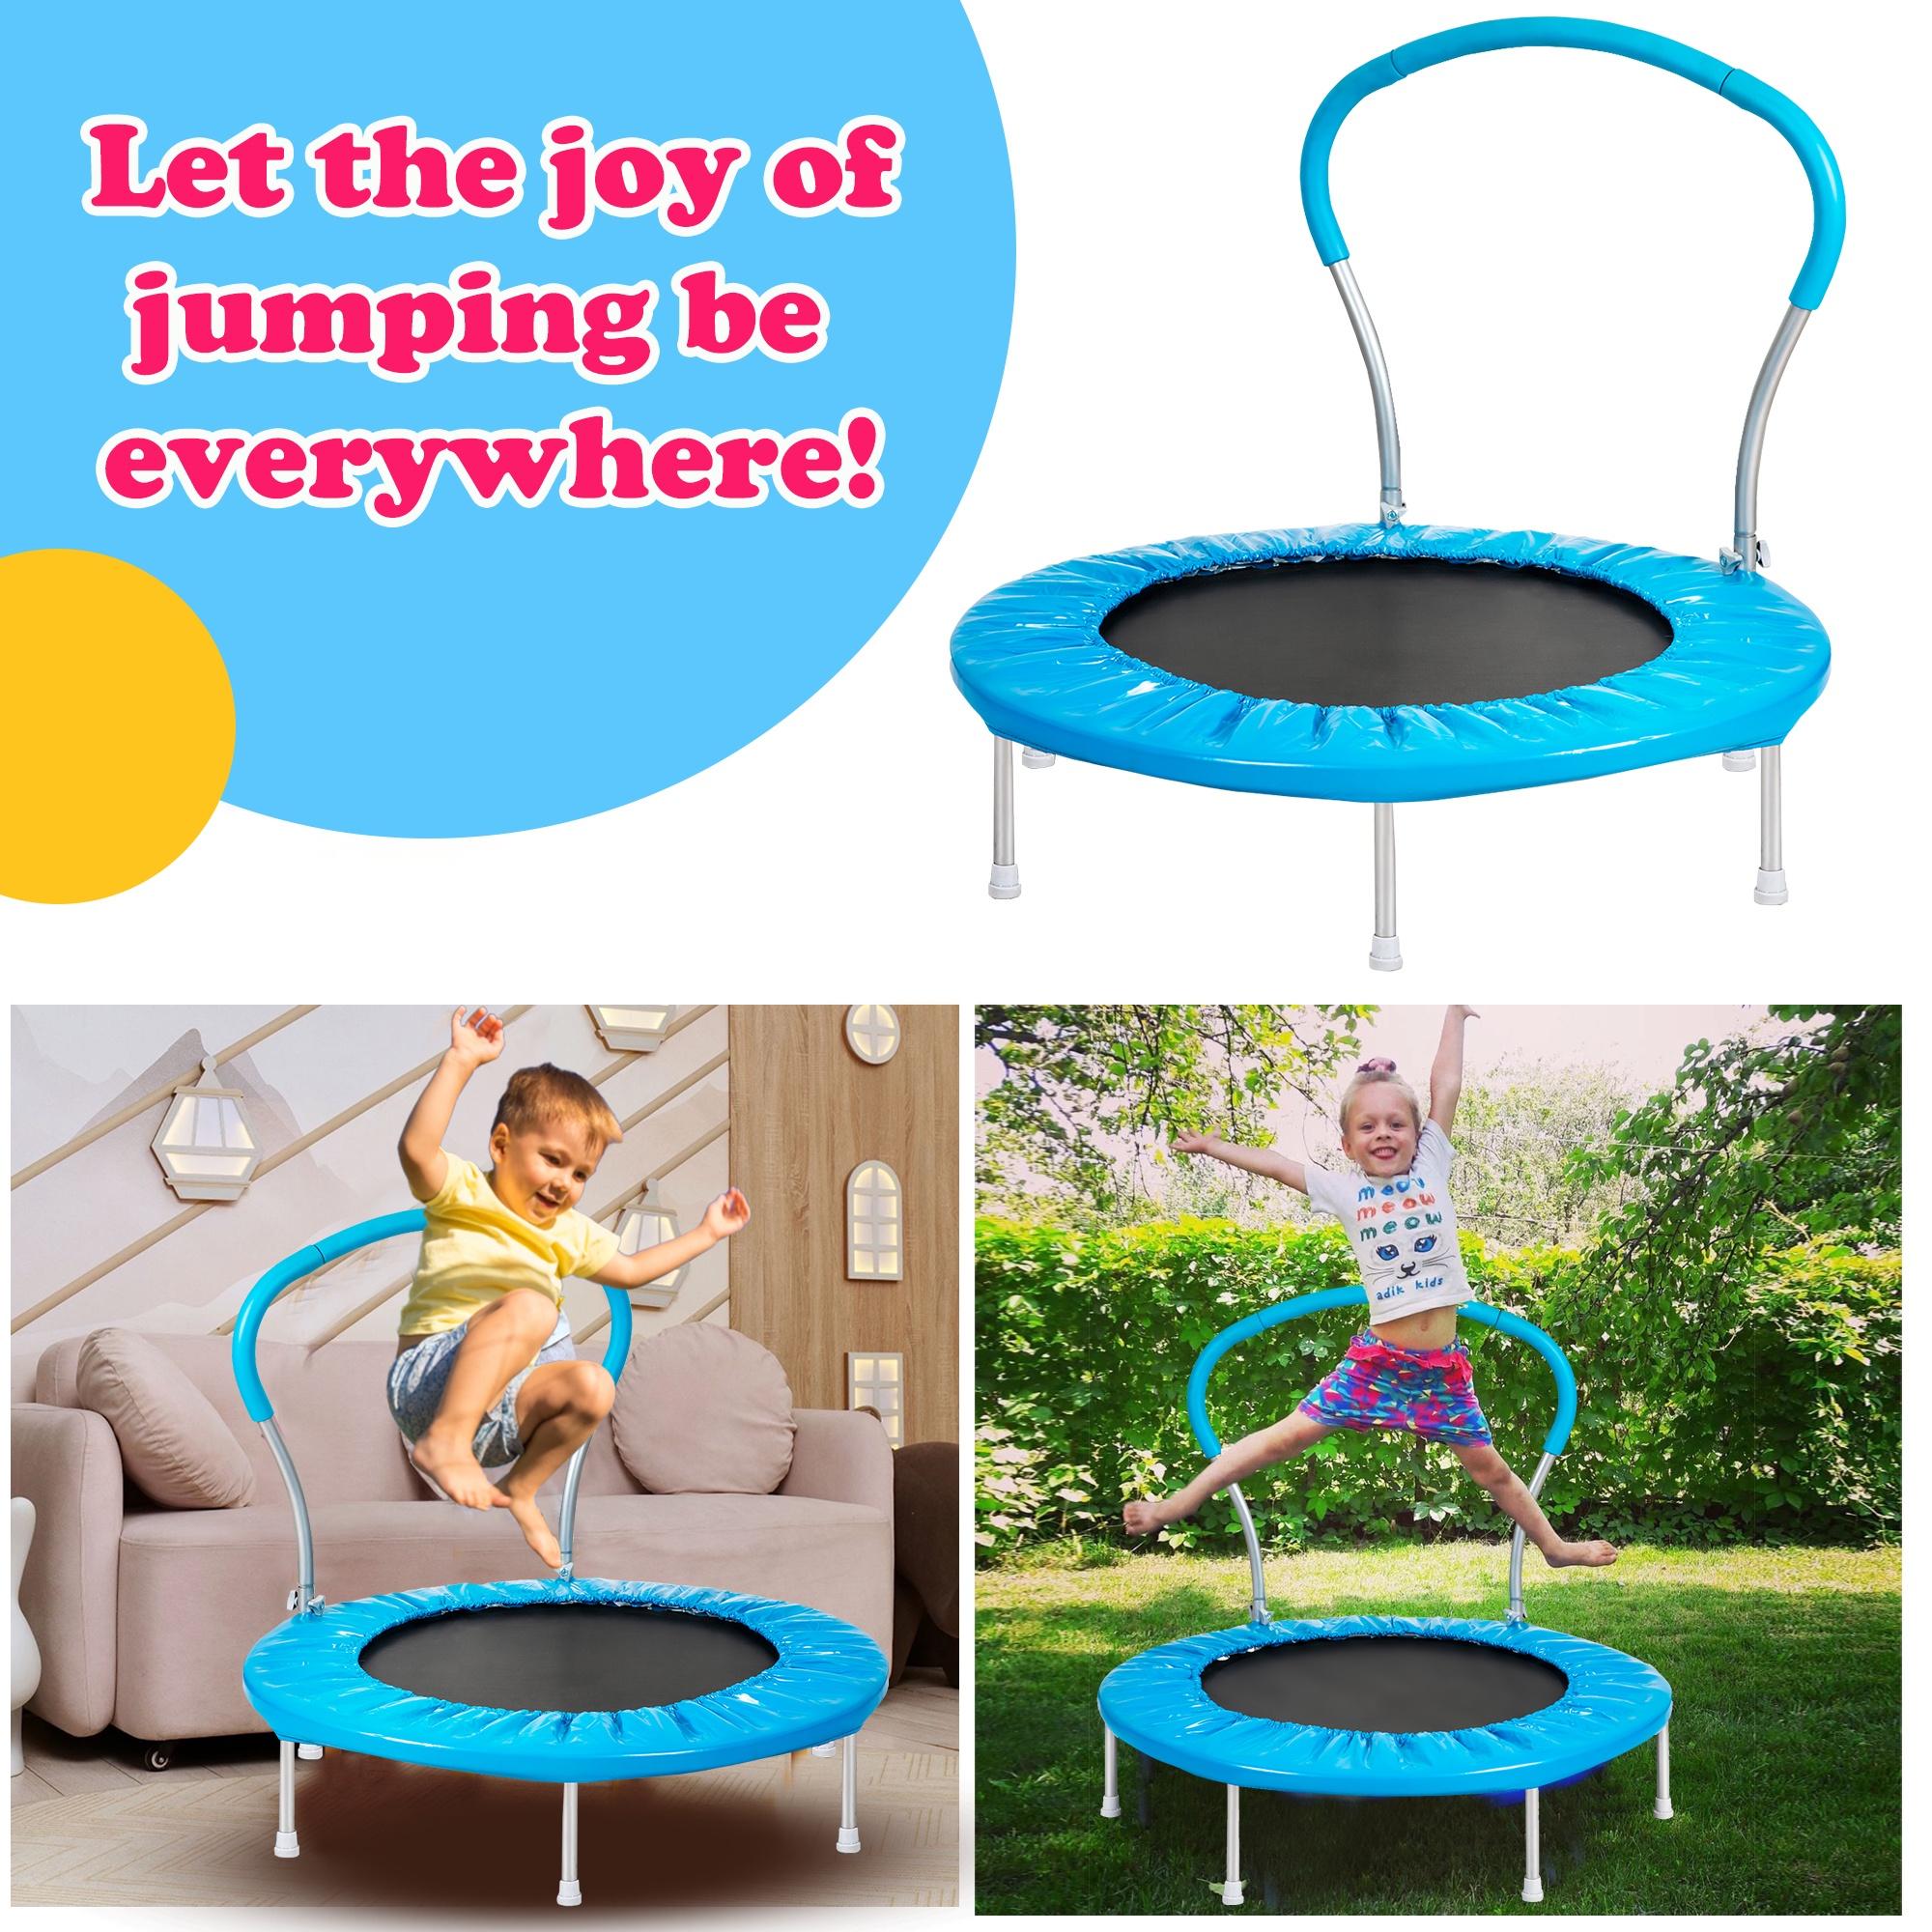 Small Trampoline for Kids Toddler, 36'' Mini Trampoline with Balance Handle, Outdoor Indoor Rebounder Round Trampoline as Gift for Boy Girl, Blue - image 3 of 9